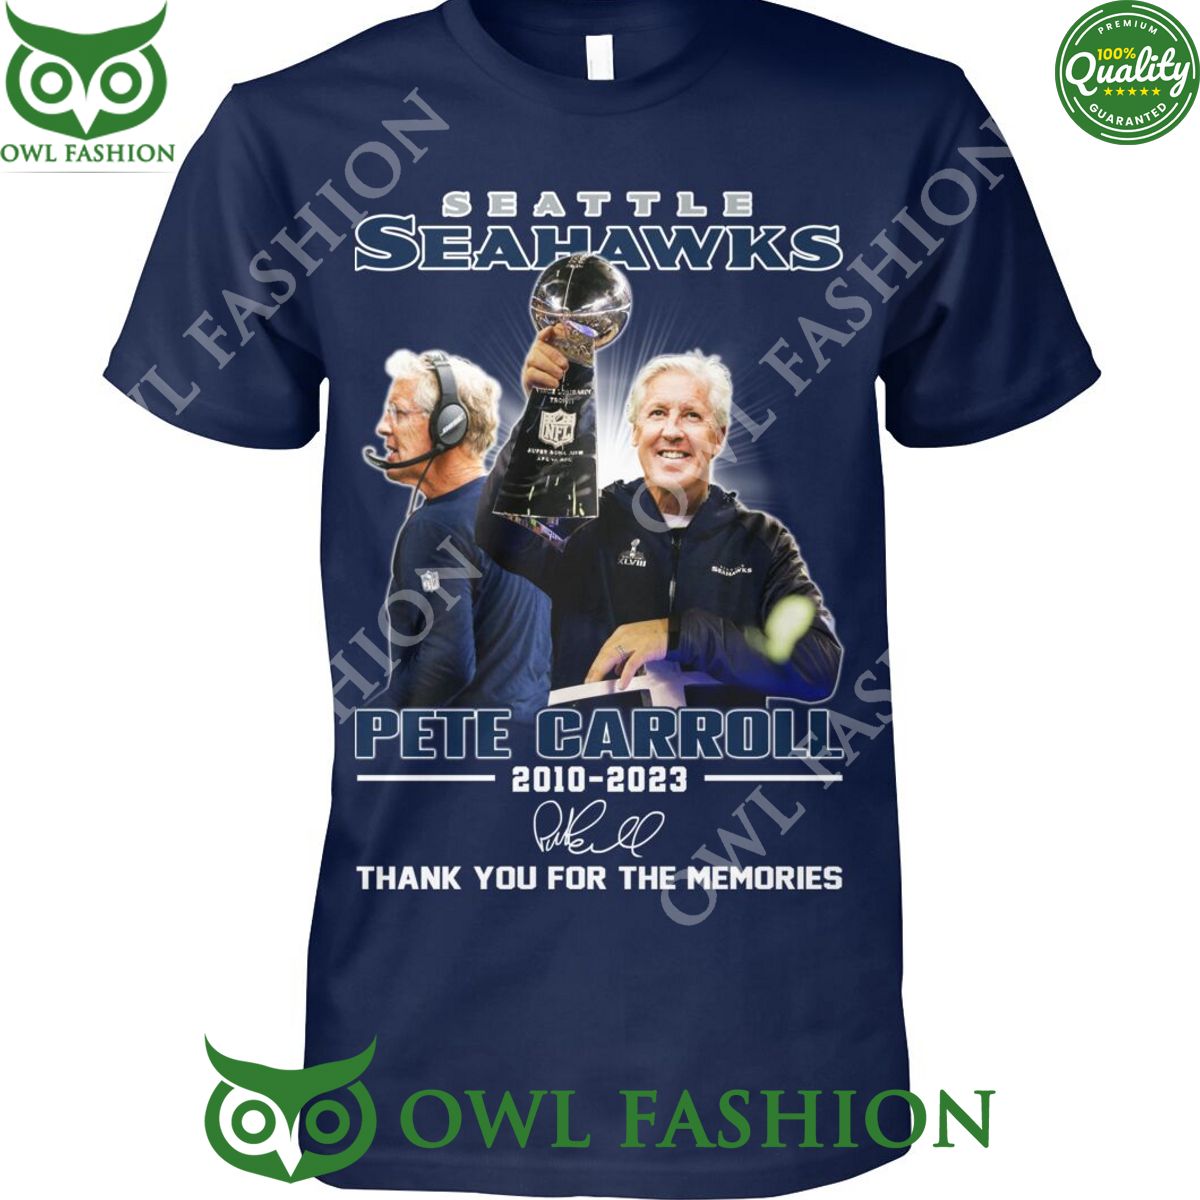 Seattles Seahawks Pete Carroll 2010 2023 Legend Thank you for the memories t shirt